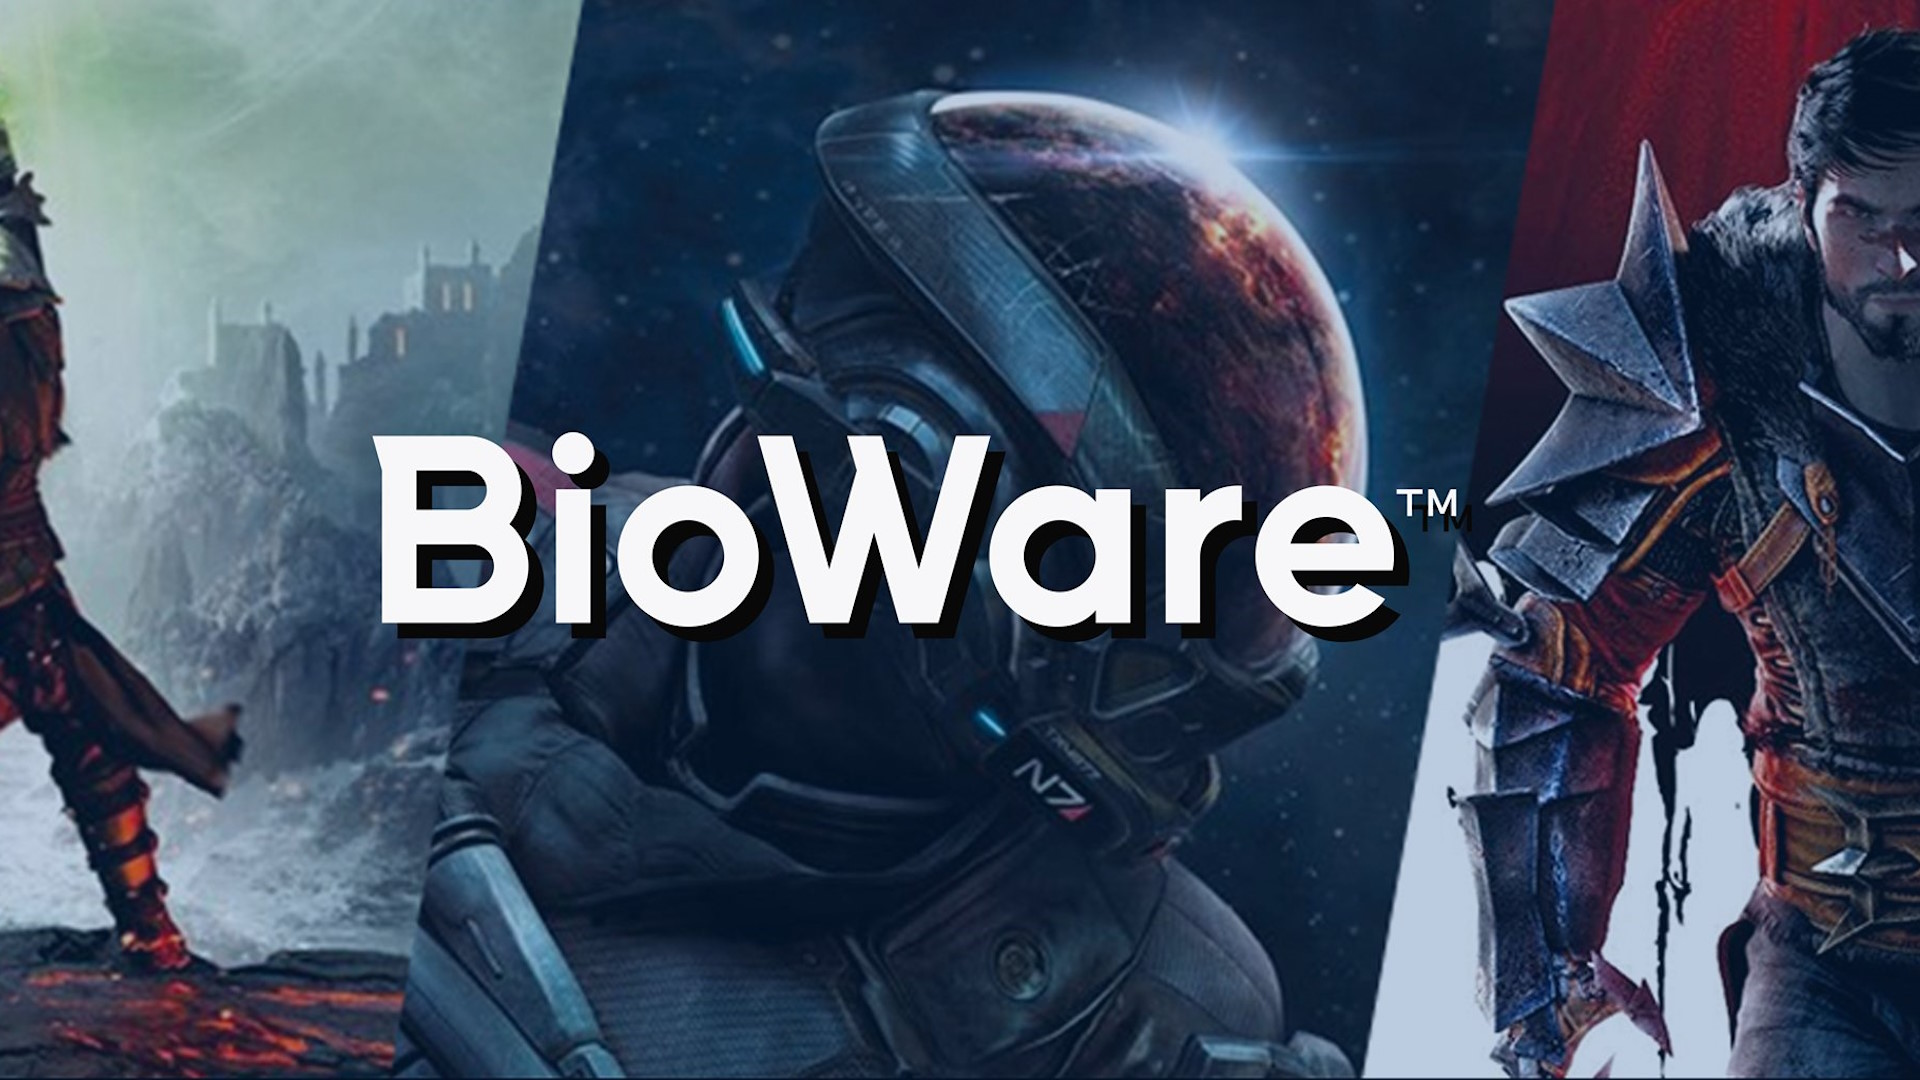  Laid-off BioWare employees sue over severance pay: 'We are struggling to understand why BioWare is shortchanging us' 